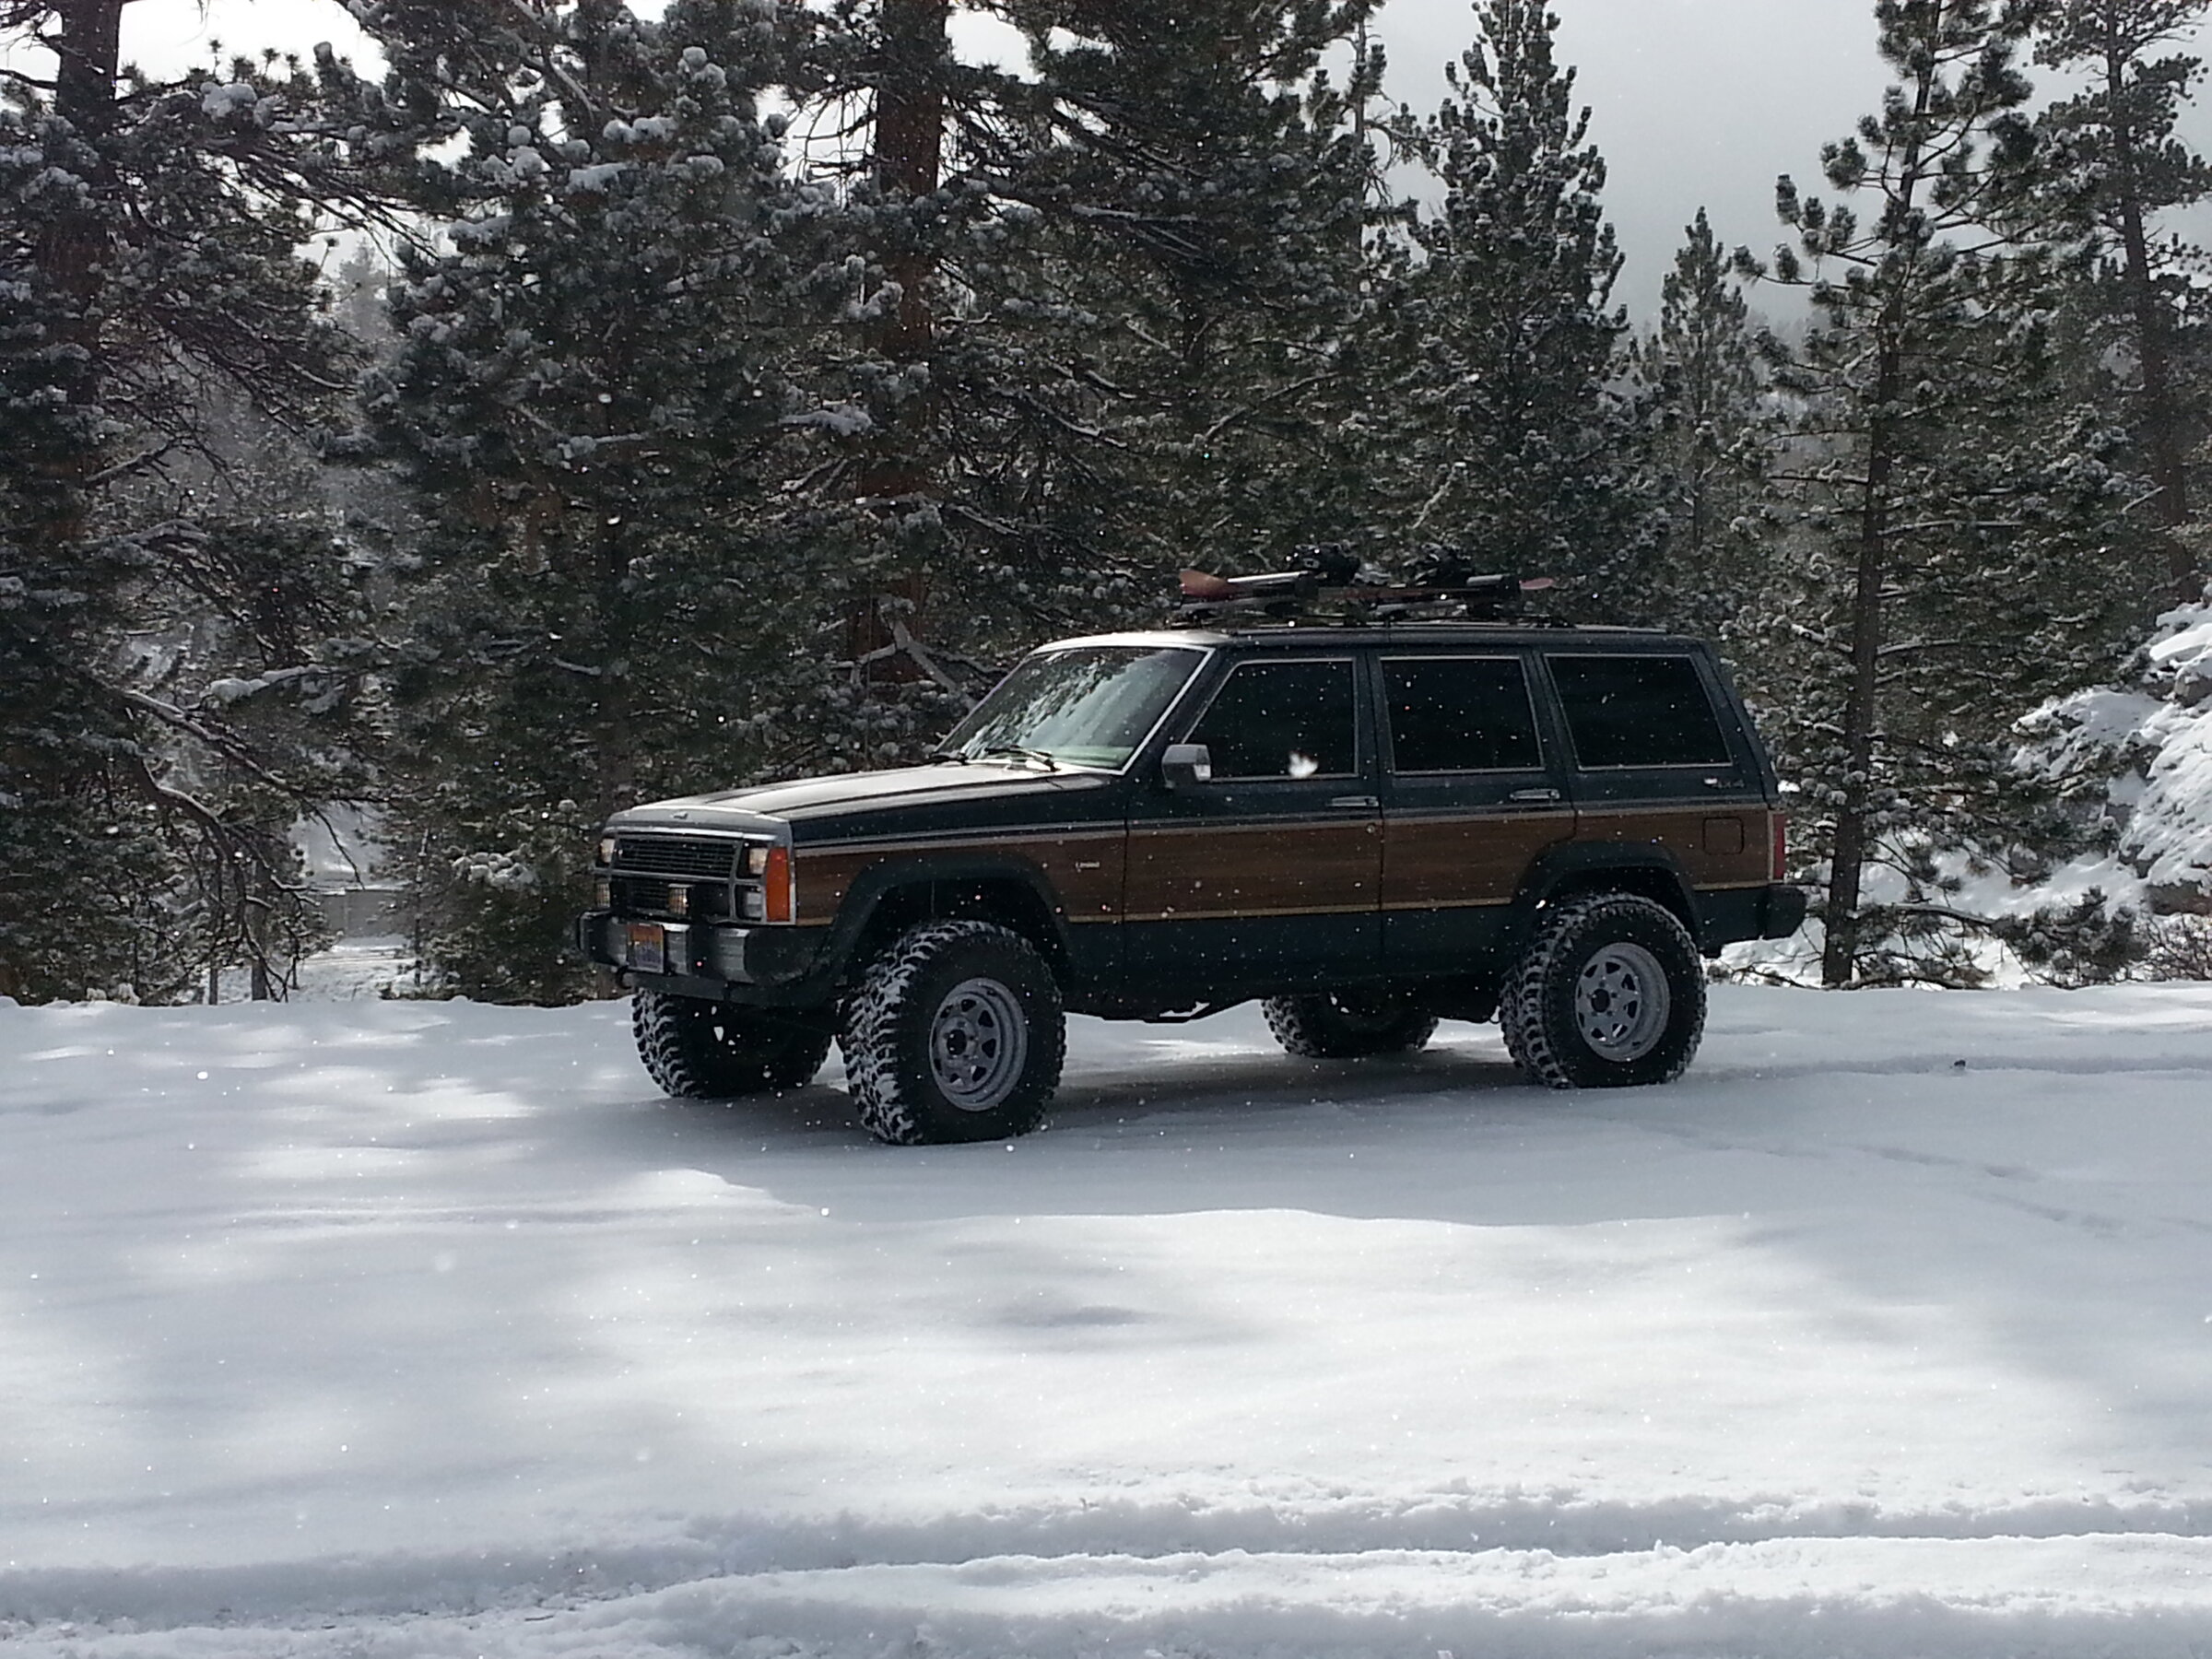 Ford Bronco Snow Pictures Please 20141231_110641